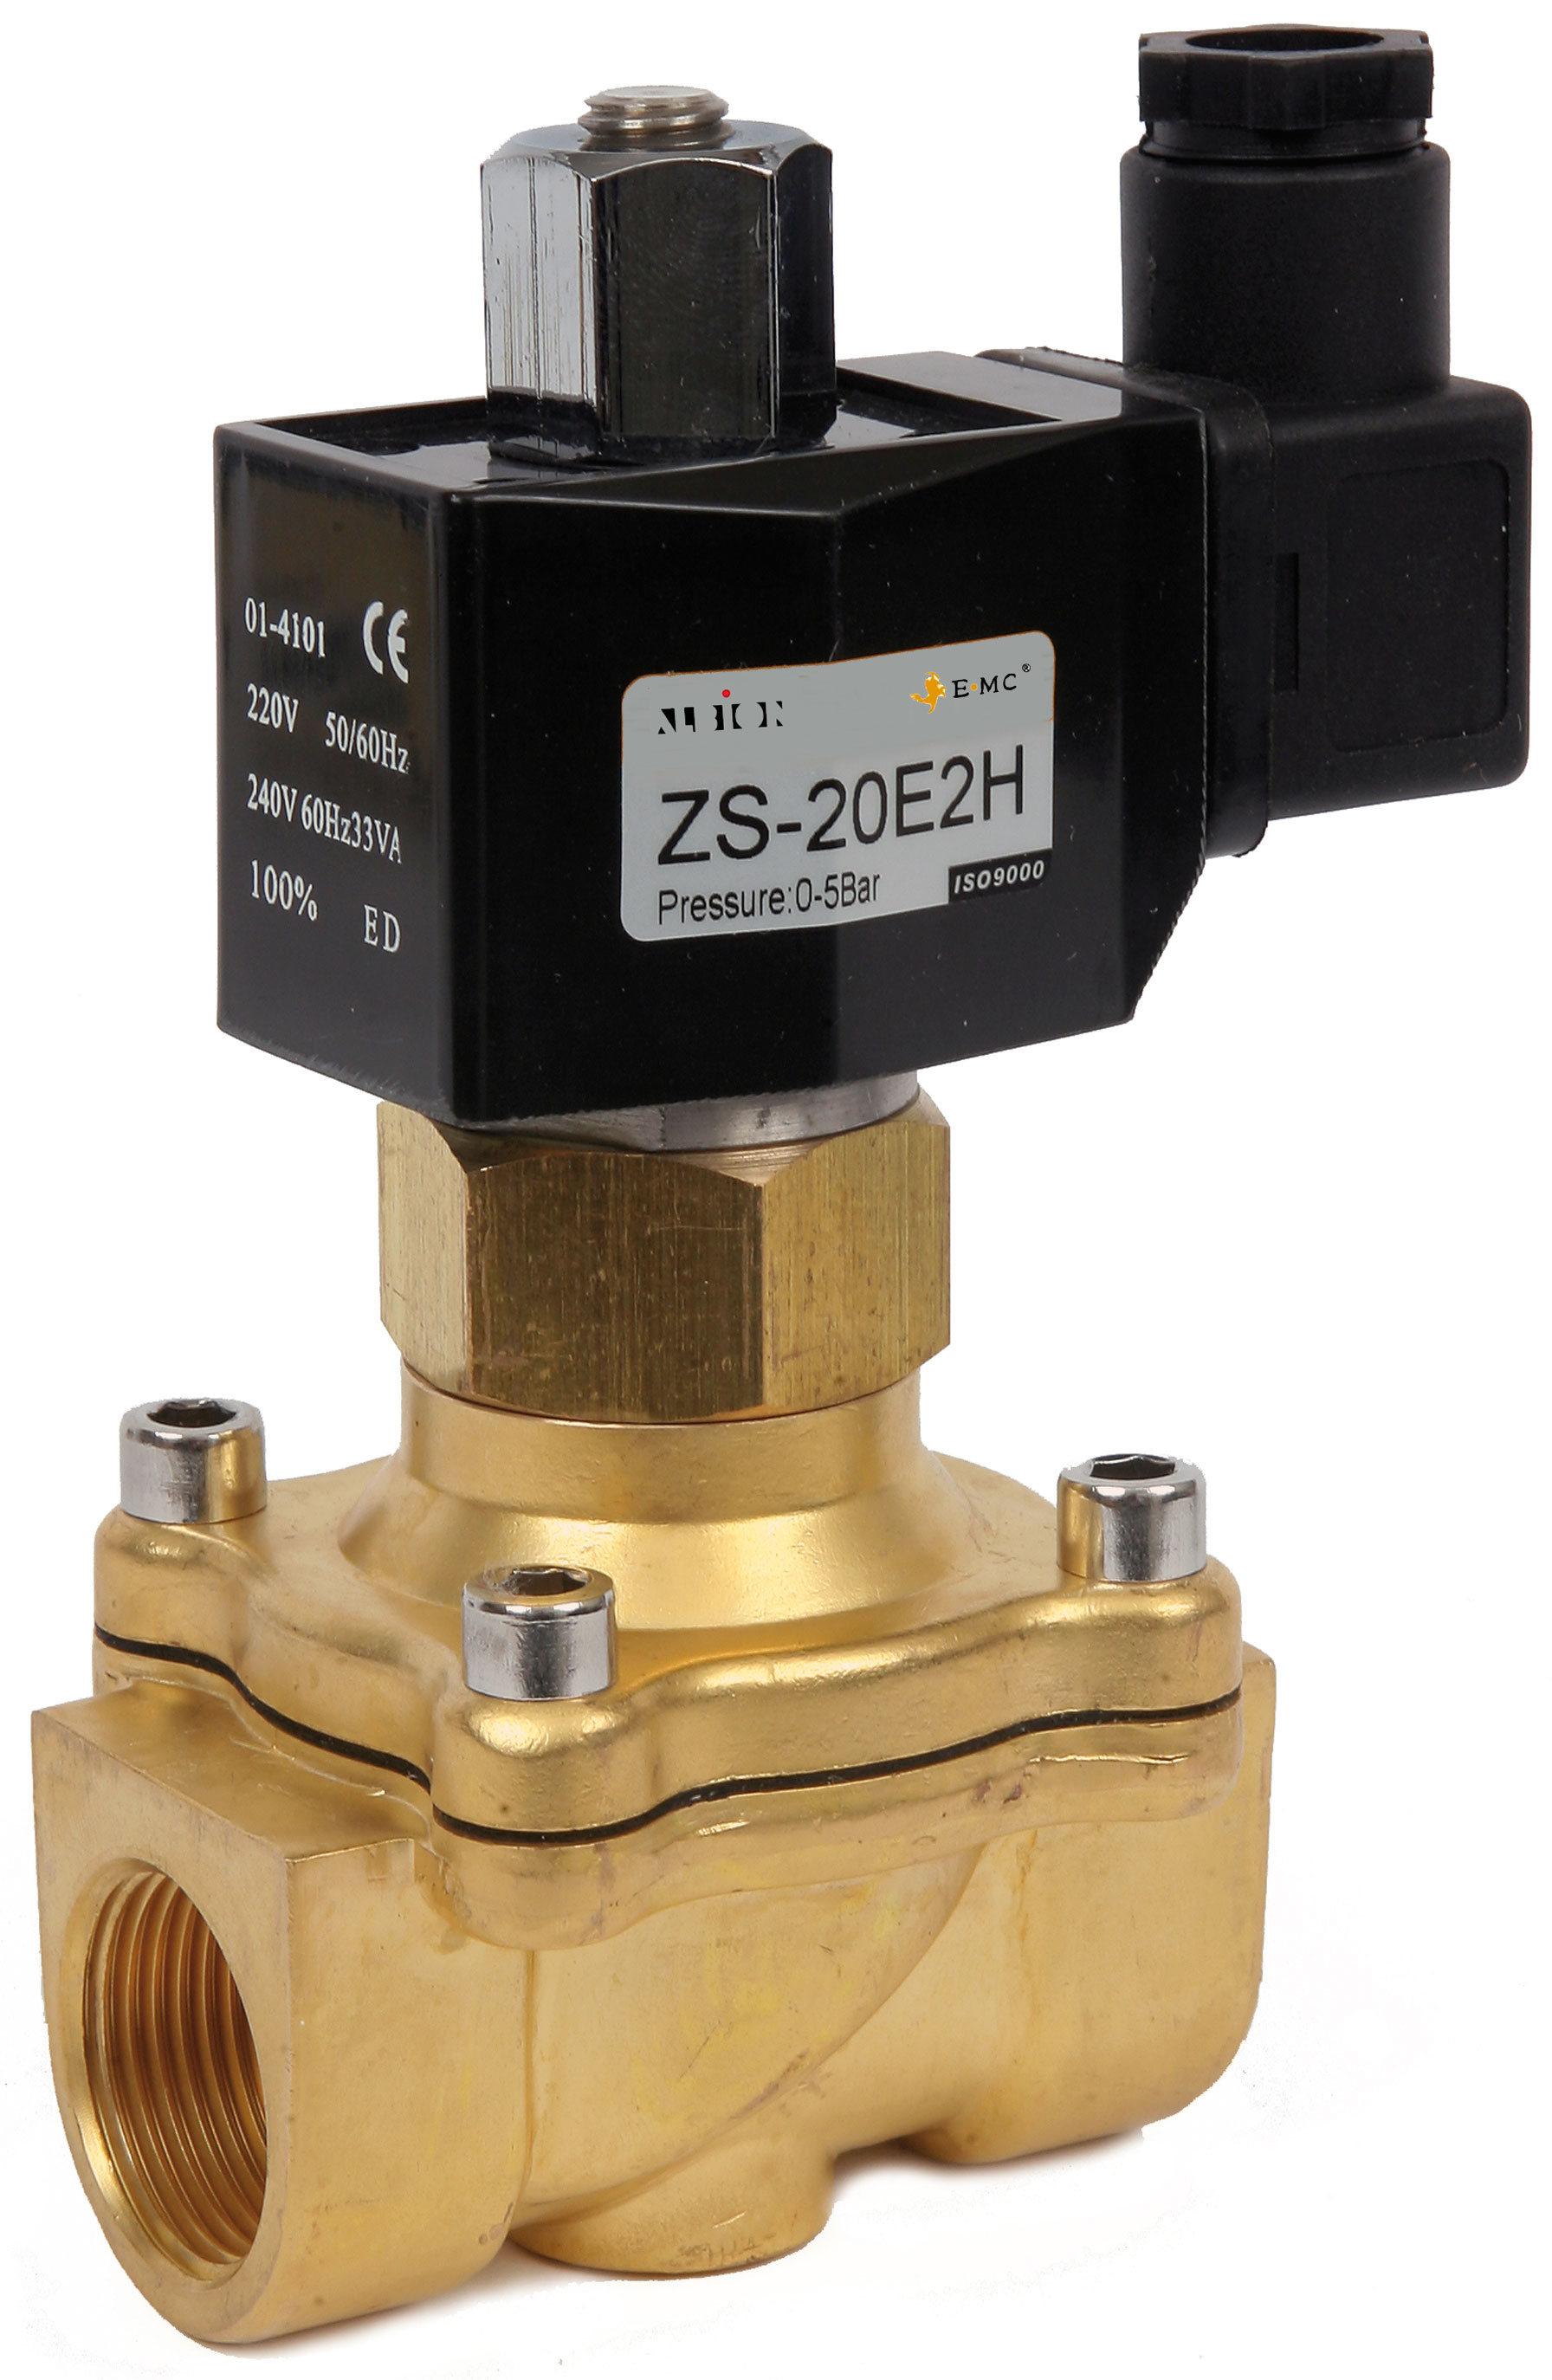 for Series SLP/ZS Solenoid Coil for 2/2 way solenoid valves various types 